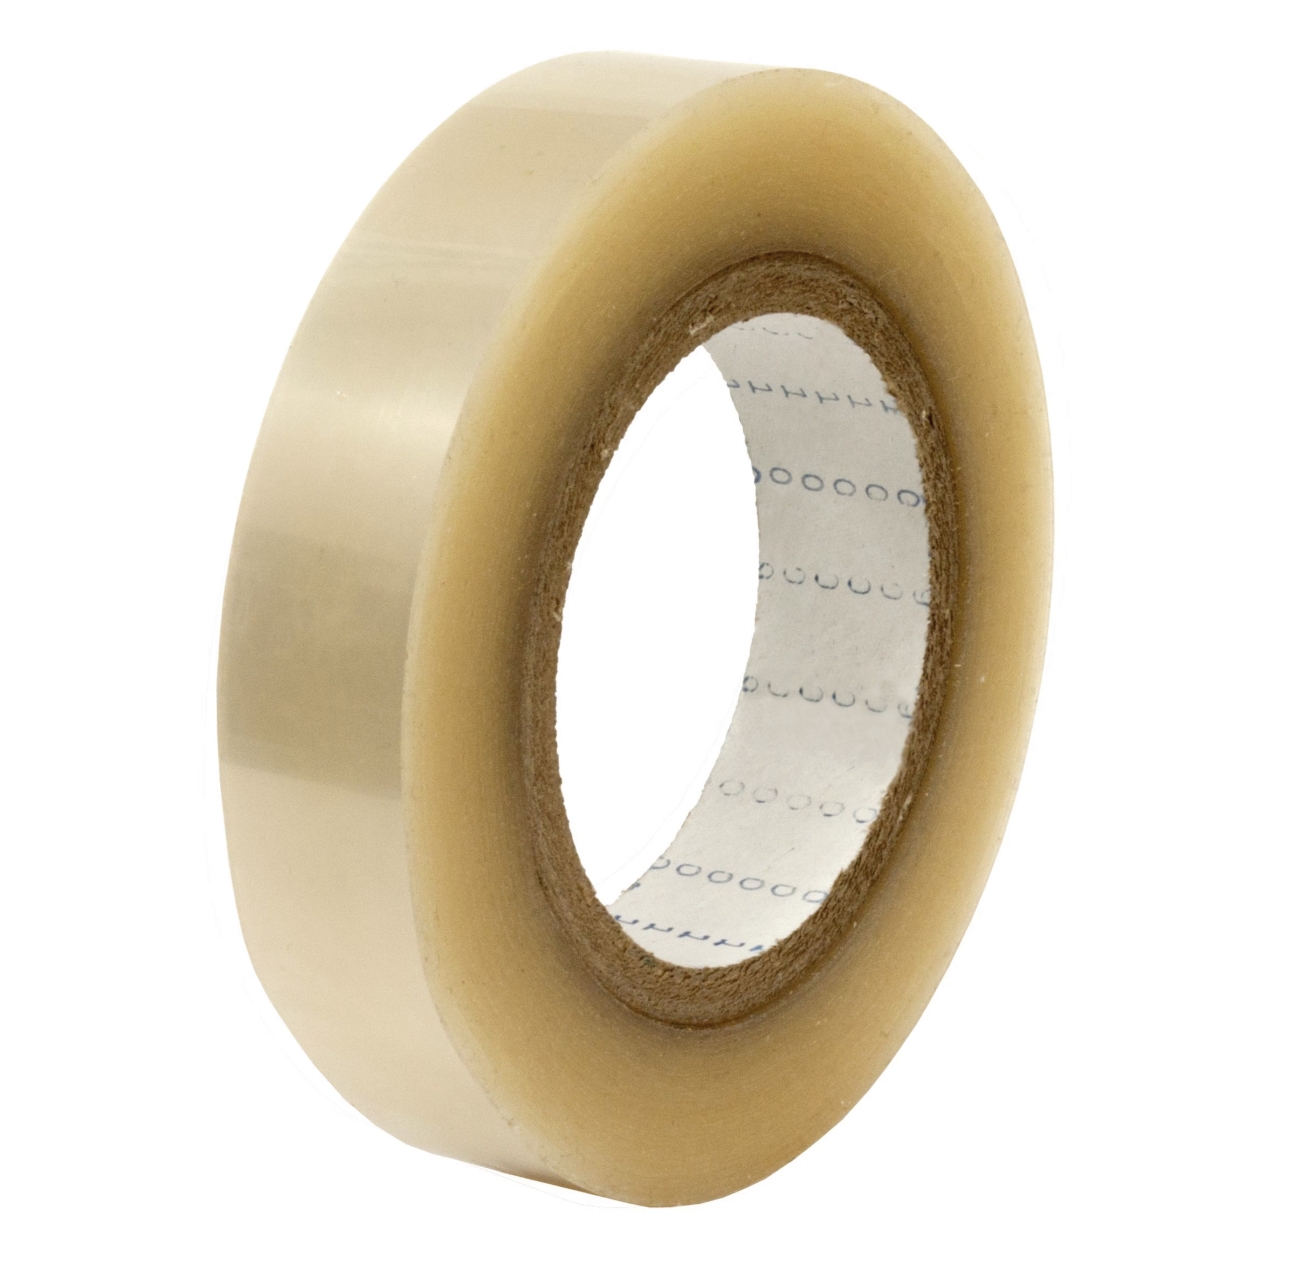 S-K-S dubbelzijdige kleefband met polyester drager 960, transparant, 9 mm x 66 m, siliconen kleefband, 0,085 mm